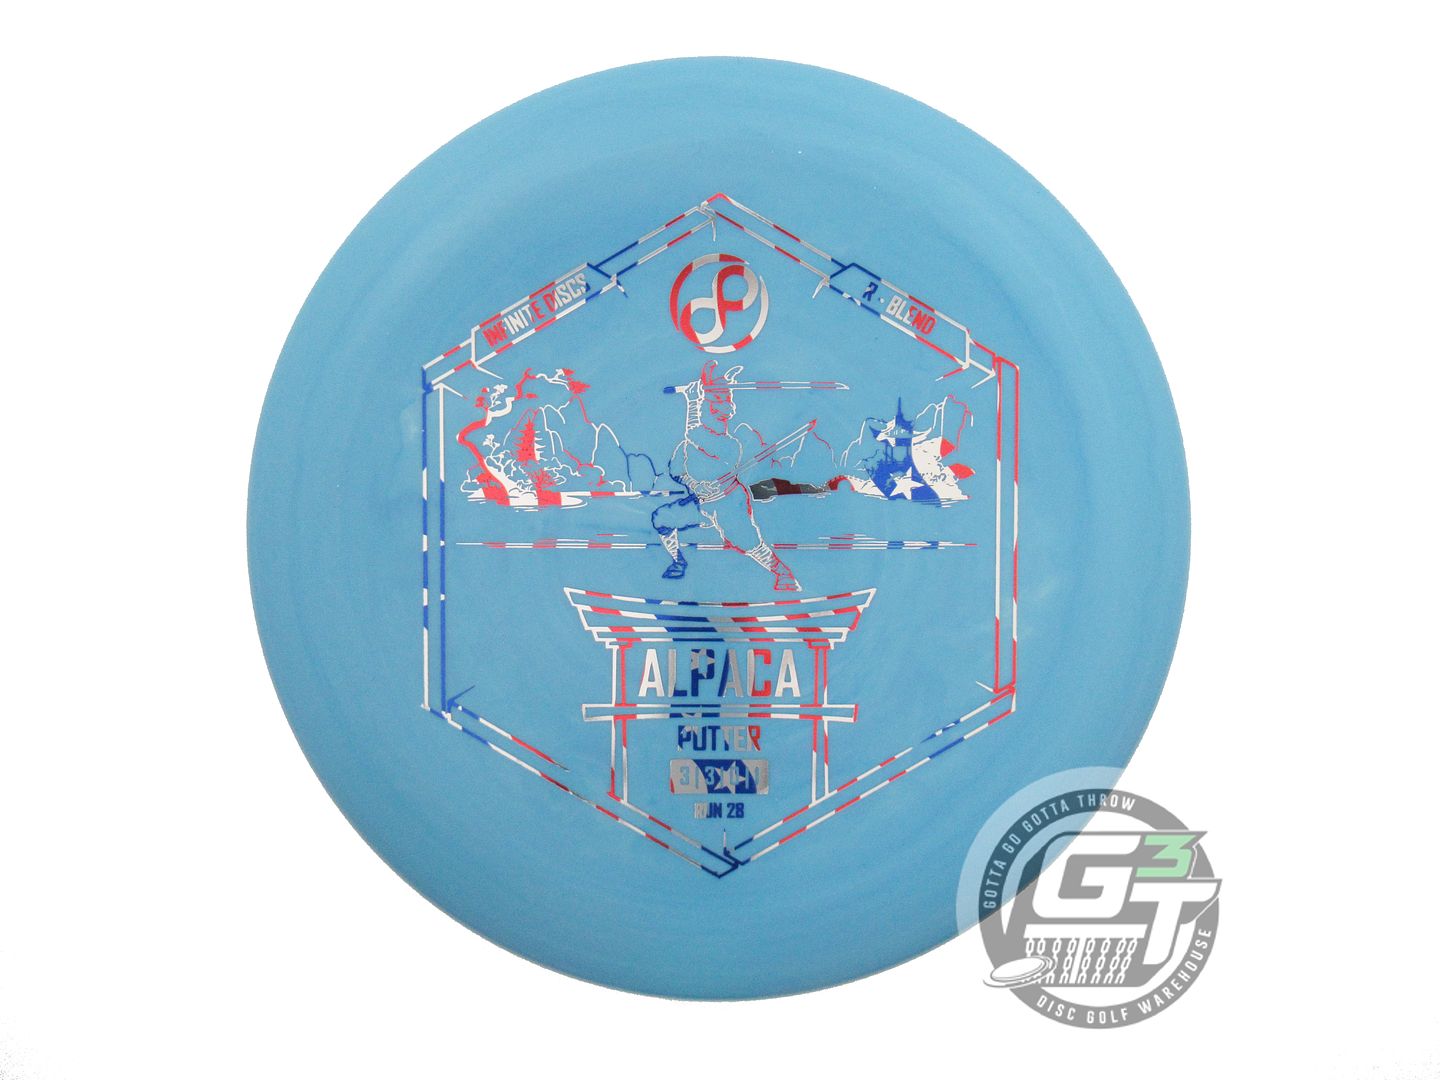 Infinite Discs R-Blend Alpaca Putter Golf Disc (Individually Listed)